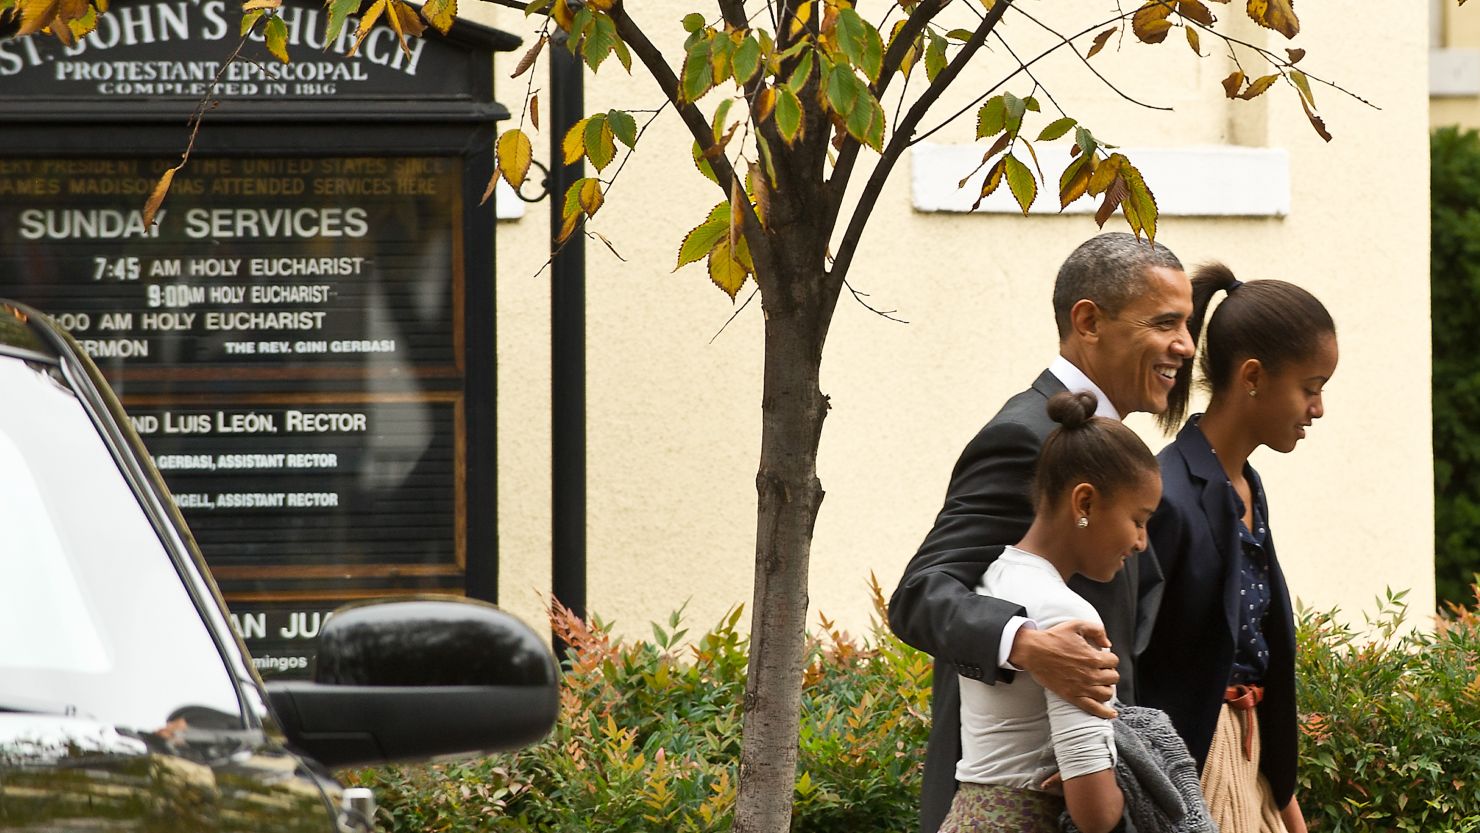 President Obama has been a father and role model for his two girls, Sasha and Malia.